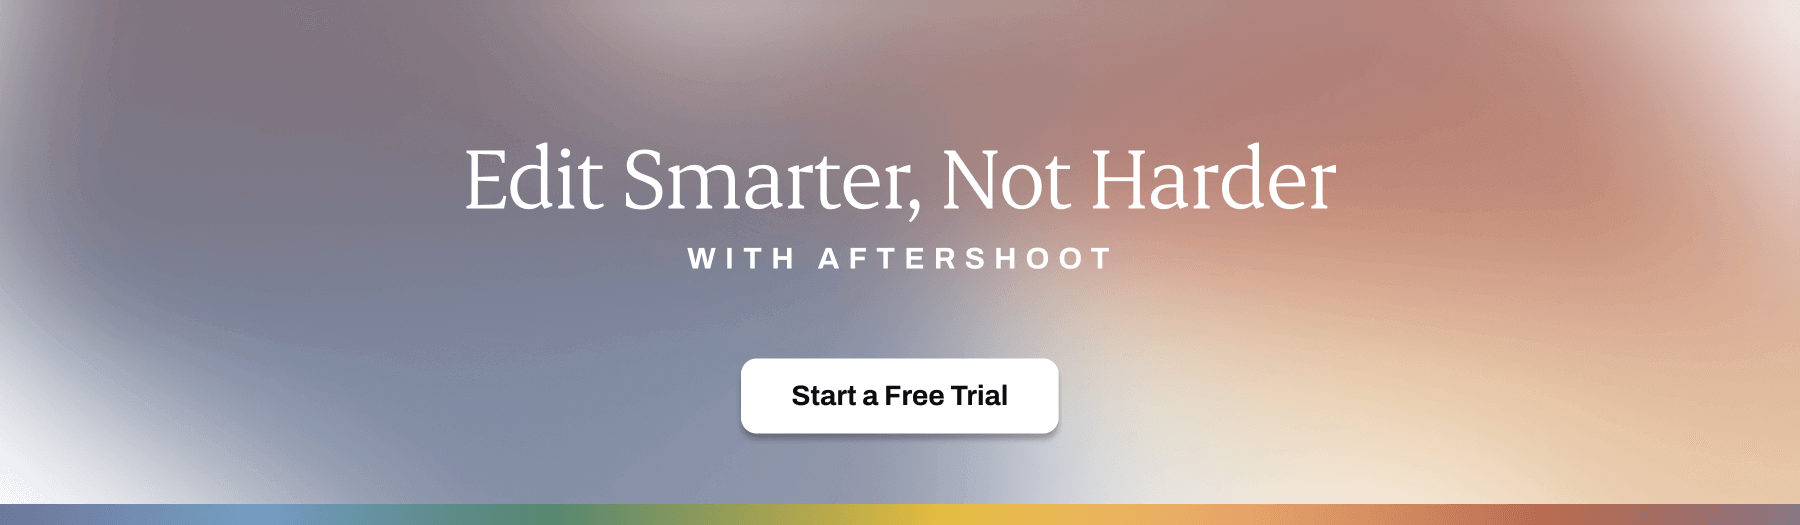 Get started with Aftershoot, free for 30 days